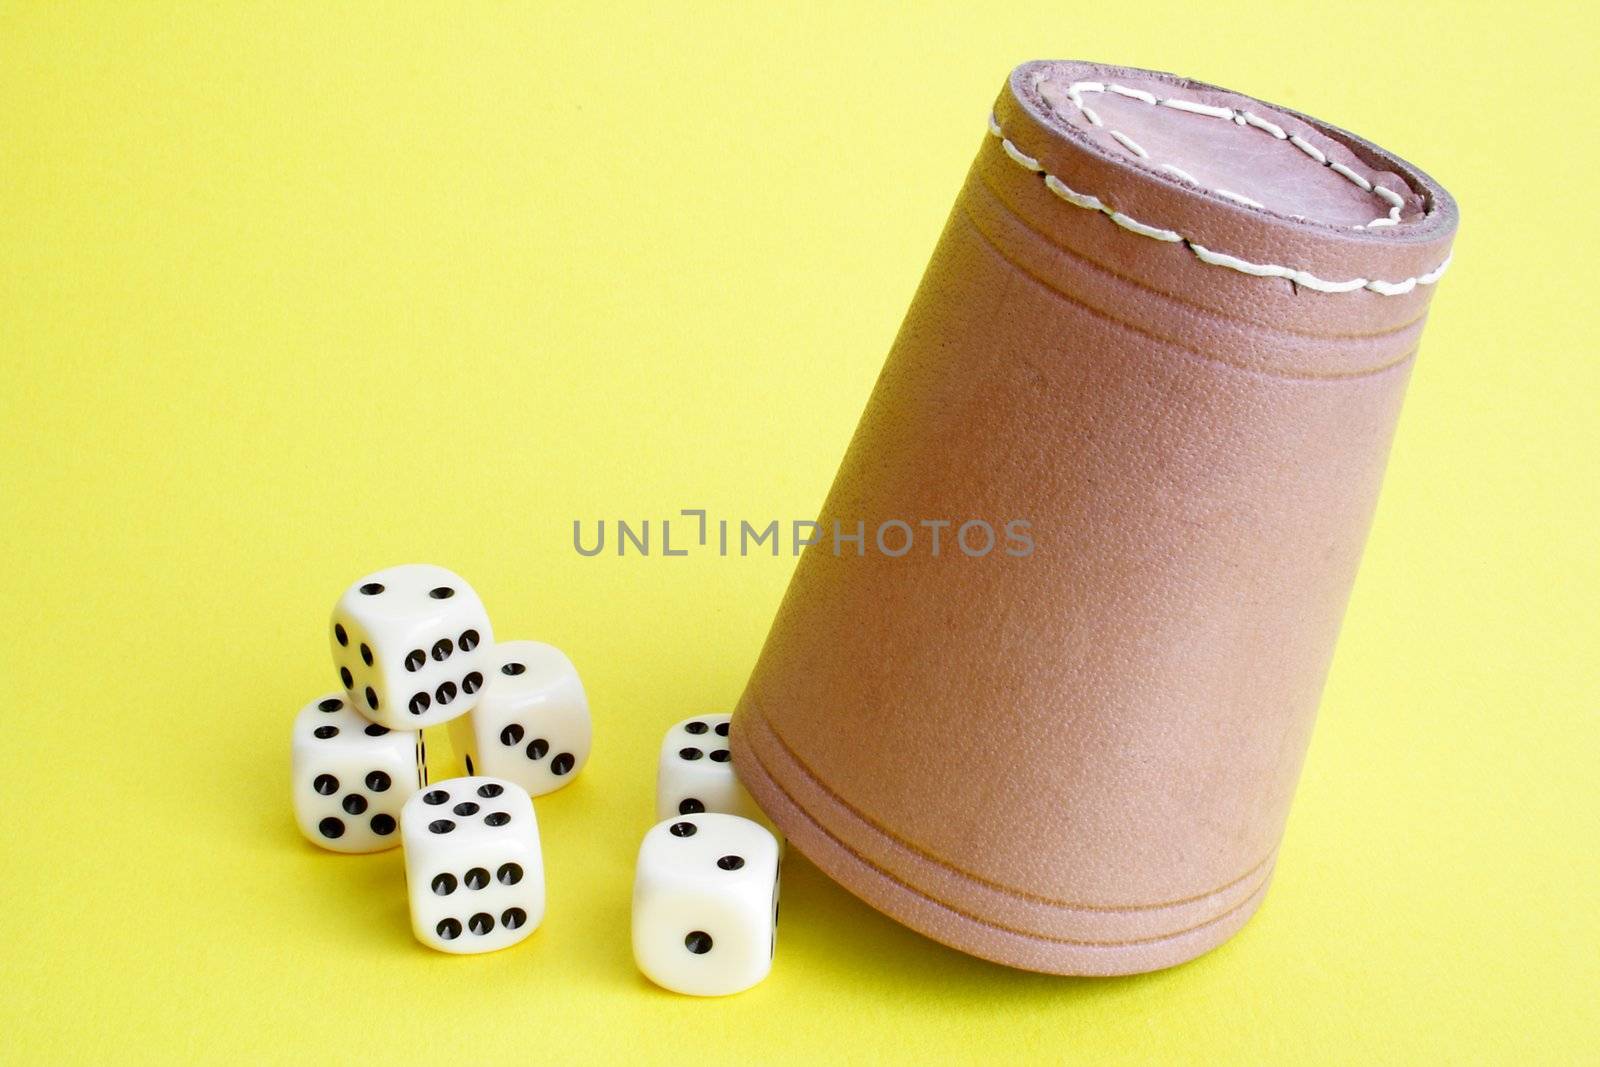 A dice shaker and several dices. All on a plain yellow background.